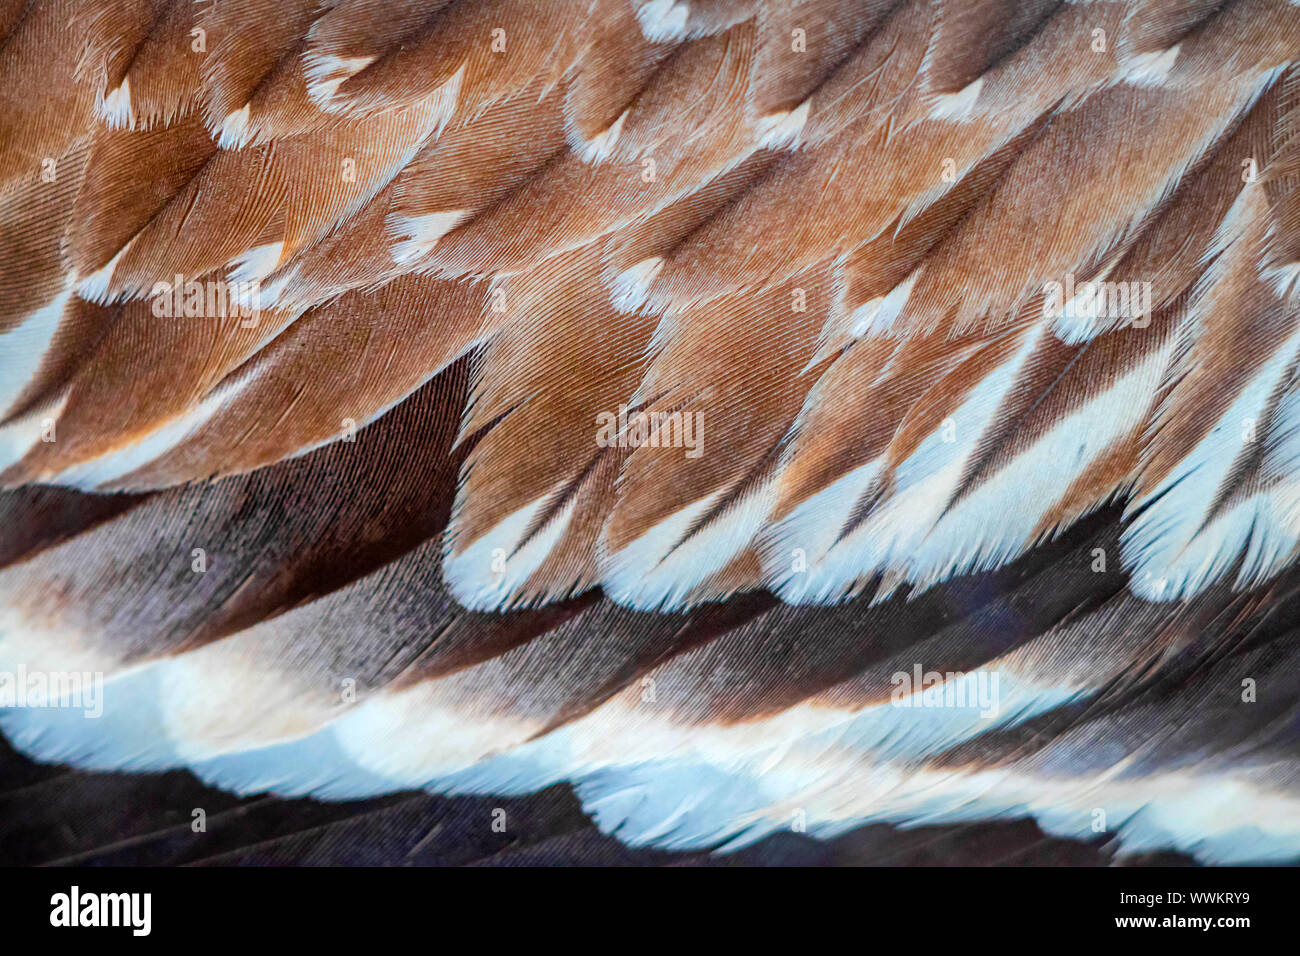 eagle feathers detail close up Makro background Stock Photo